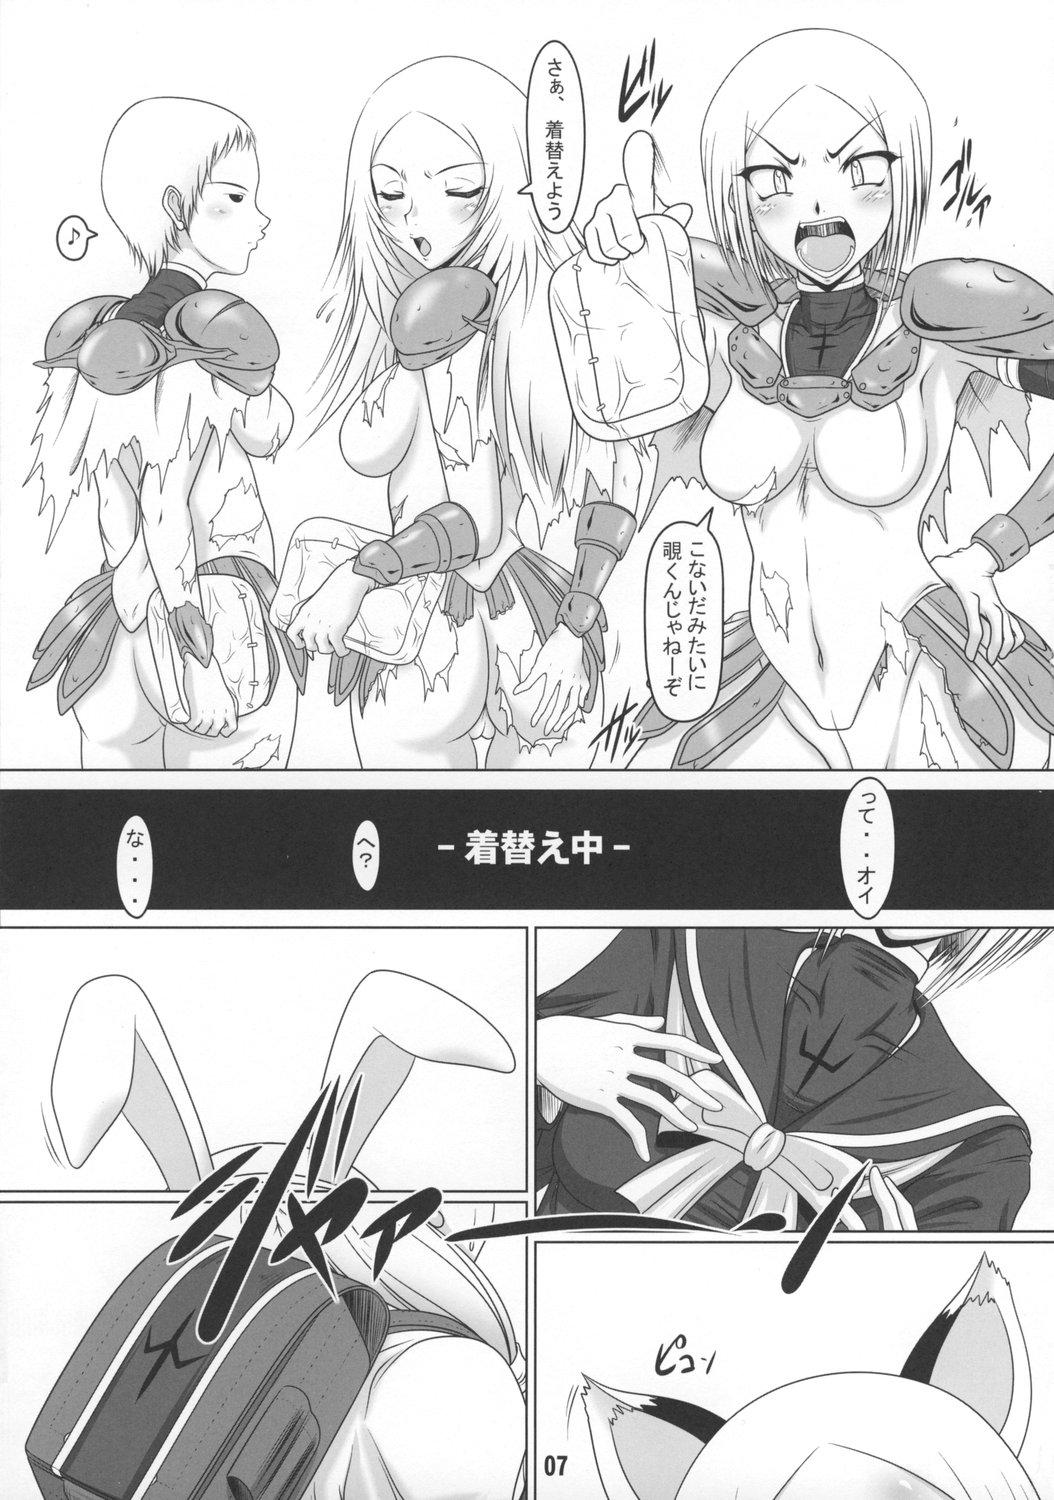 Small Tits Tokimeki CLAYMORE - Claymore Face Fucking - Page 6